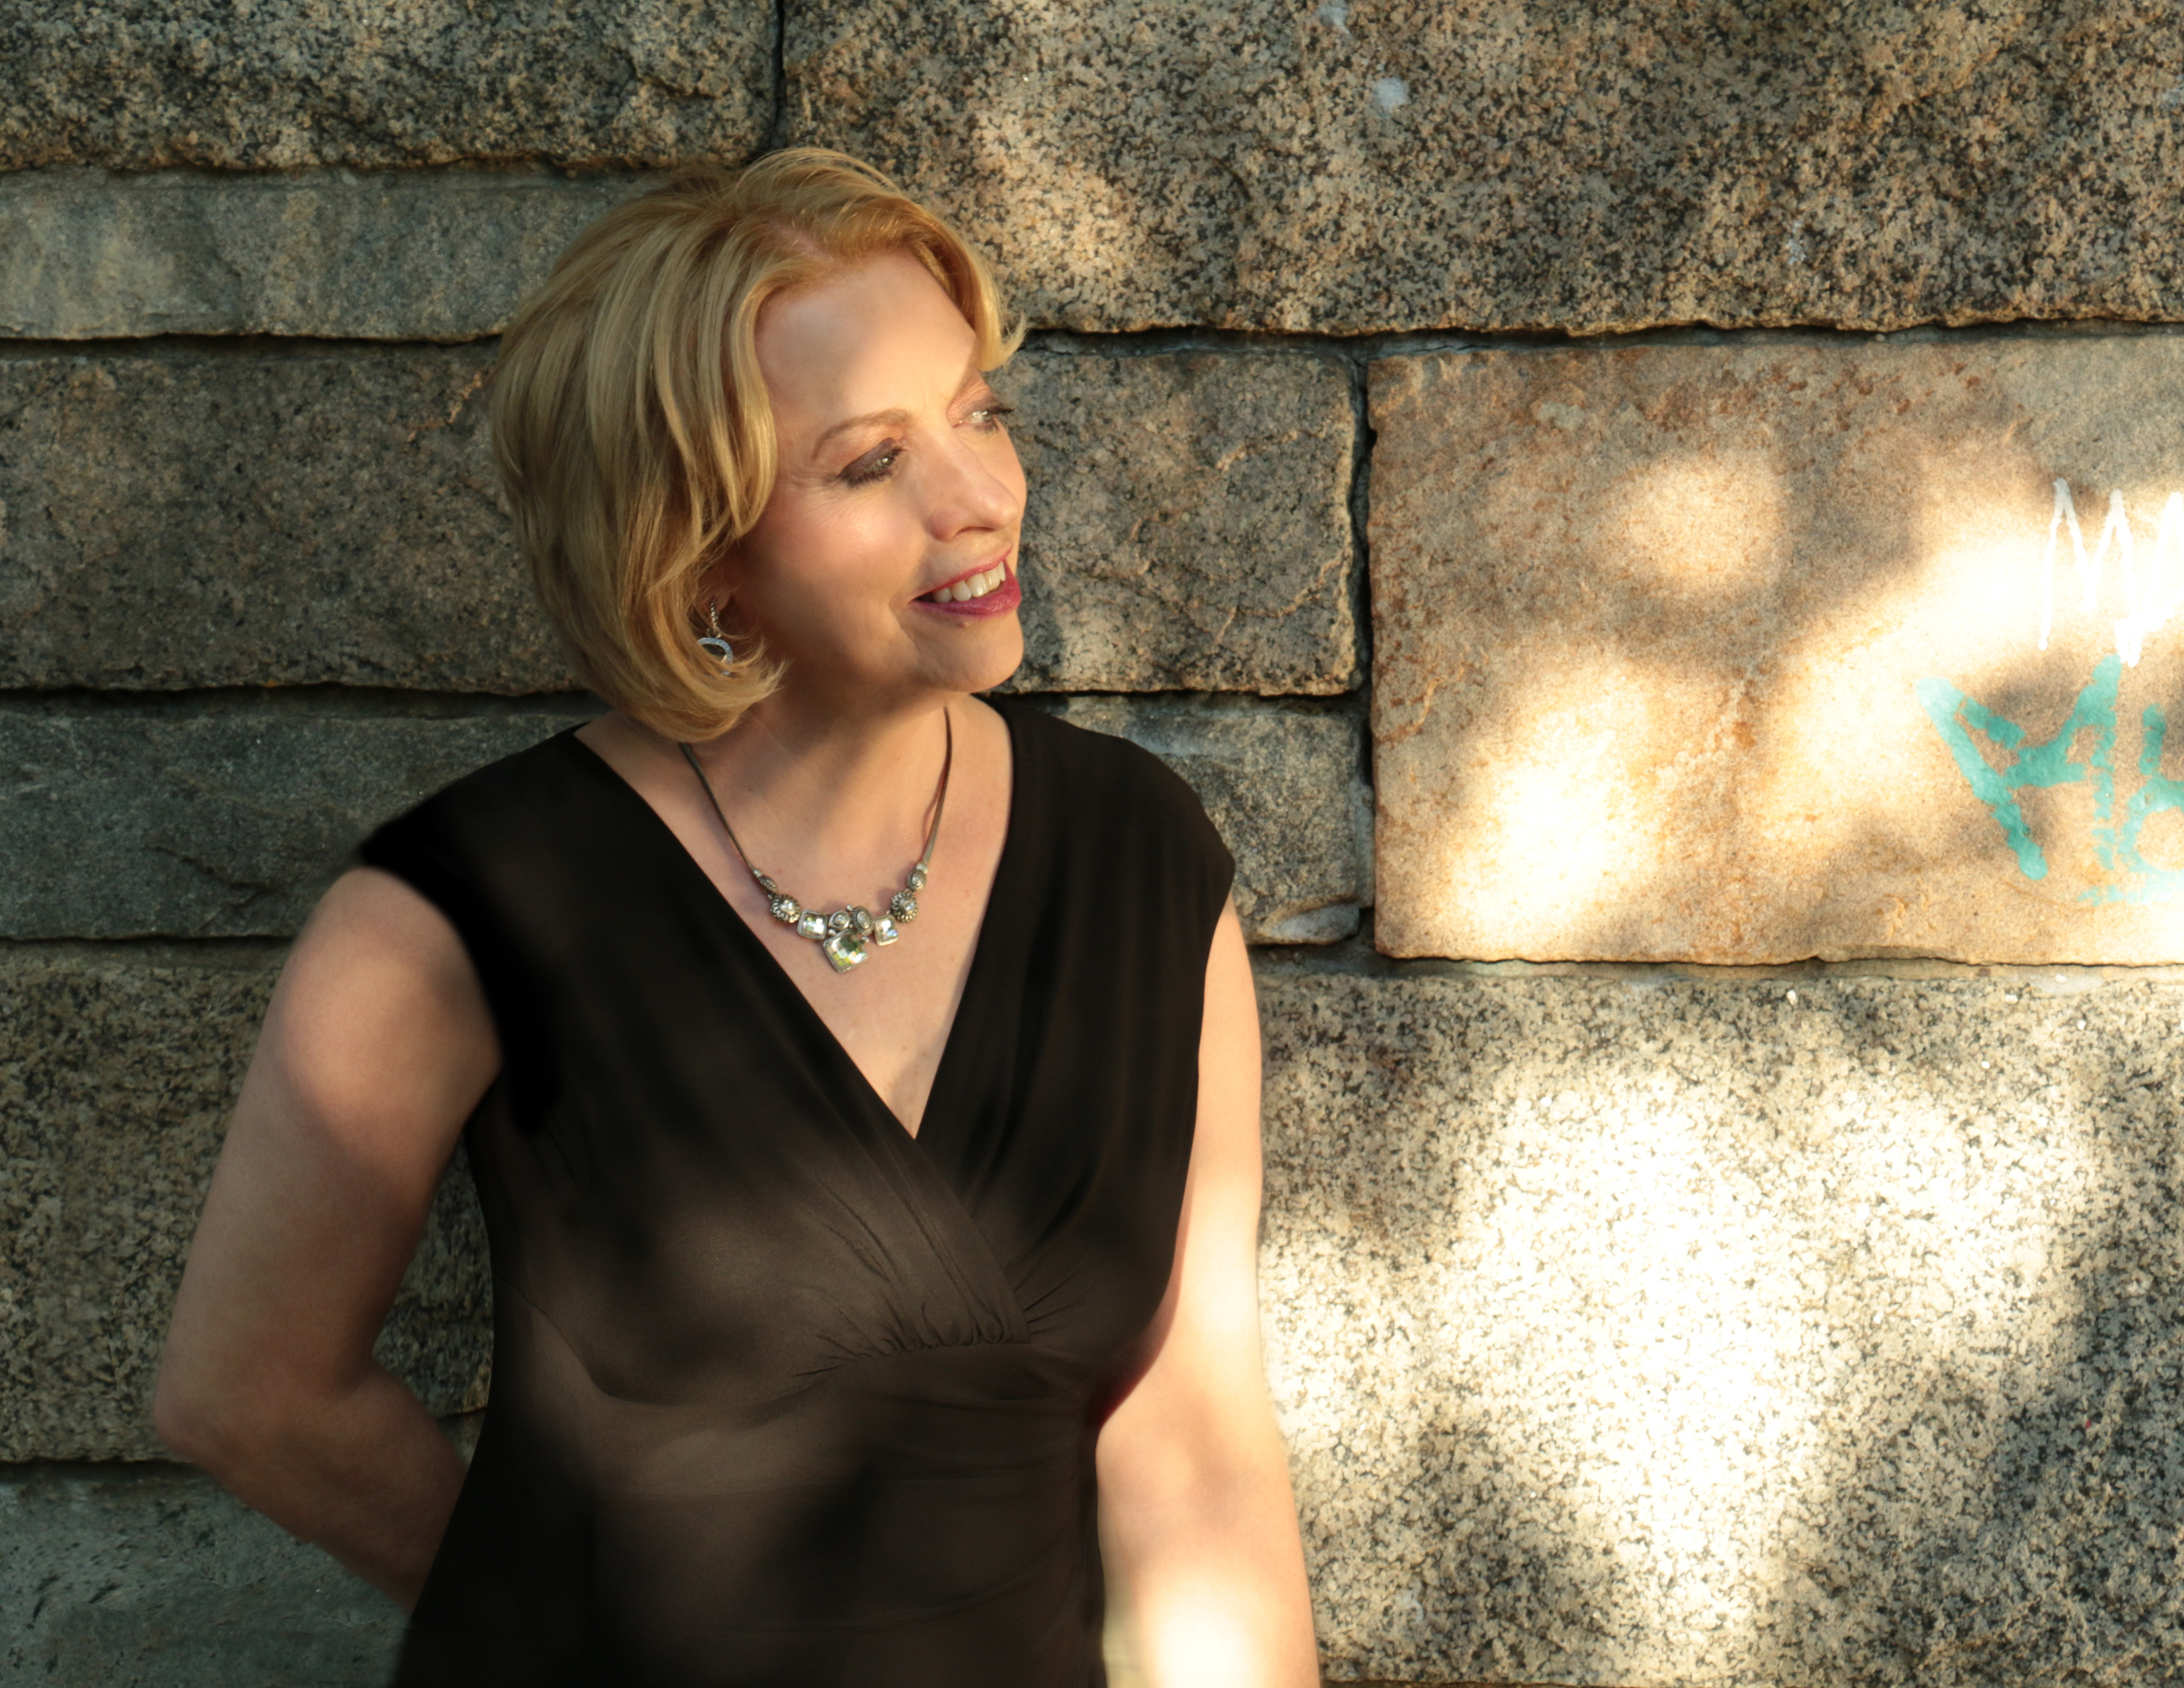 woman with short blonde hair in black dress and silver necklace smiles and leans against a stone wall dappled in sunlight